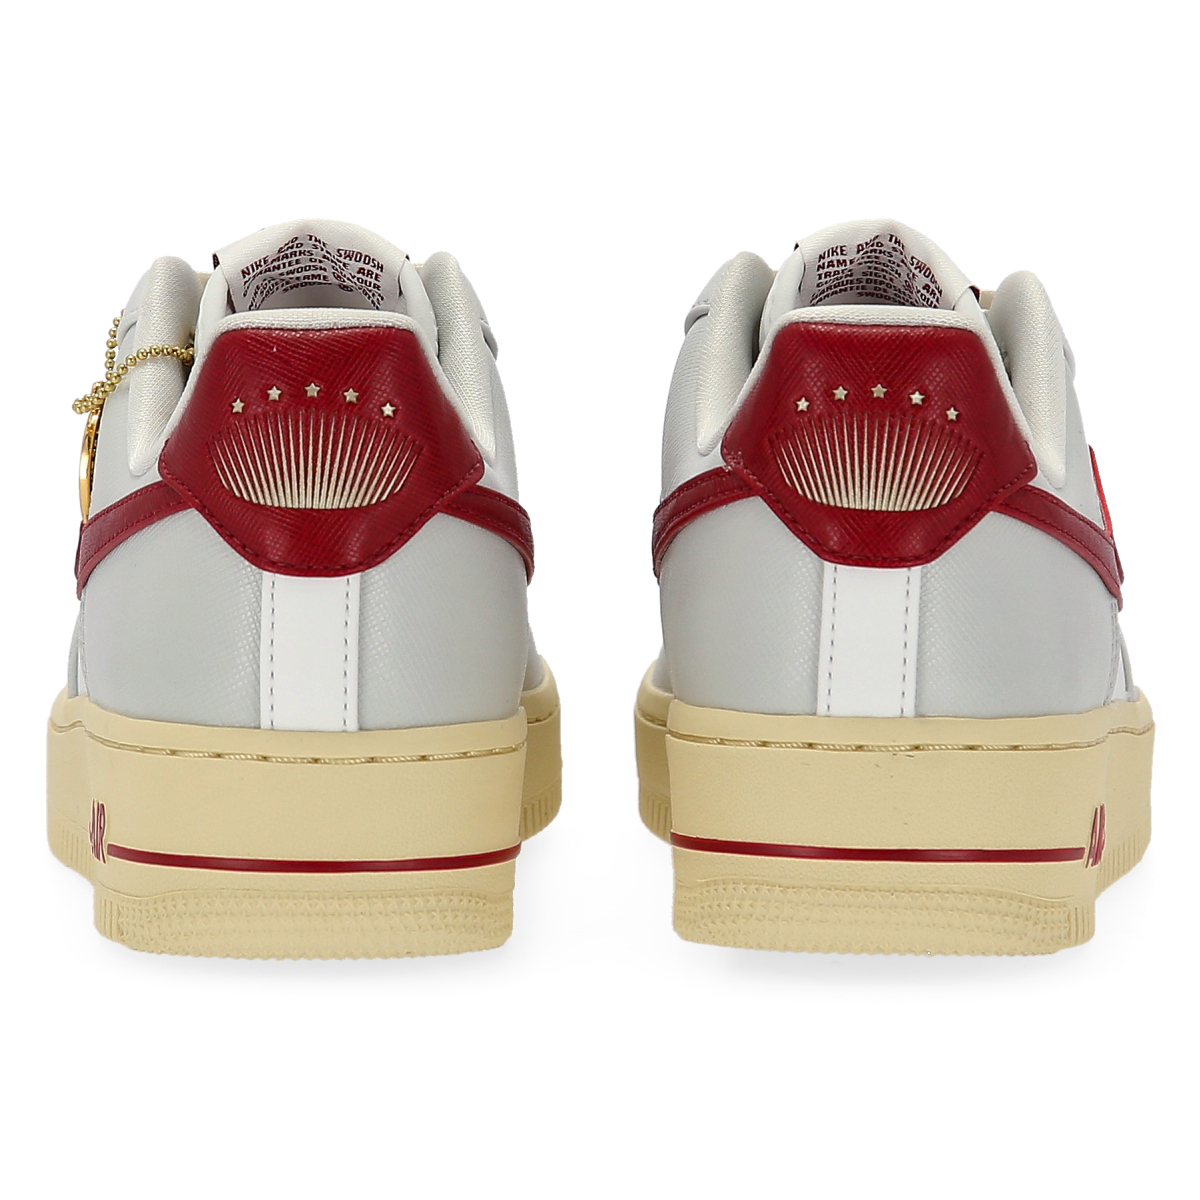 Zapatillas Nike Air Force 1 07 Se I Mujer,  image number null